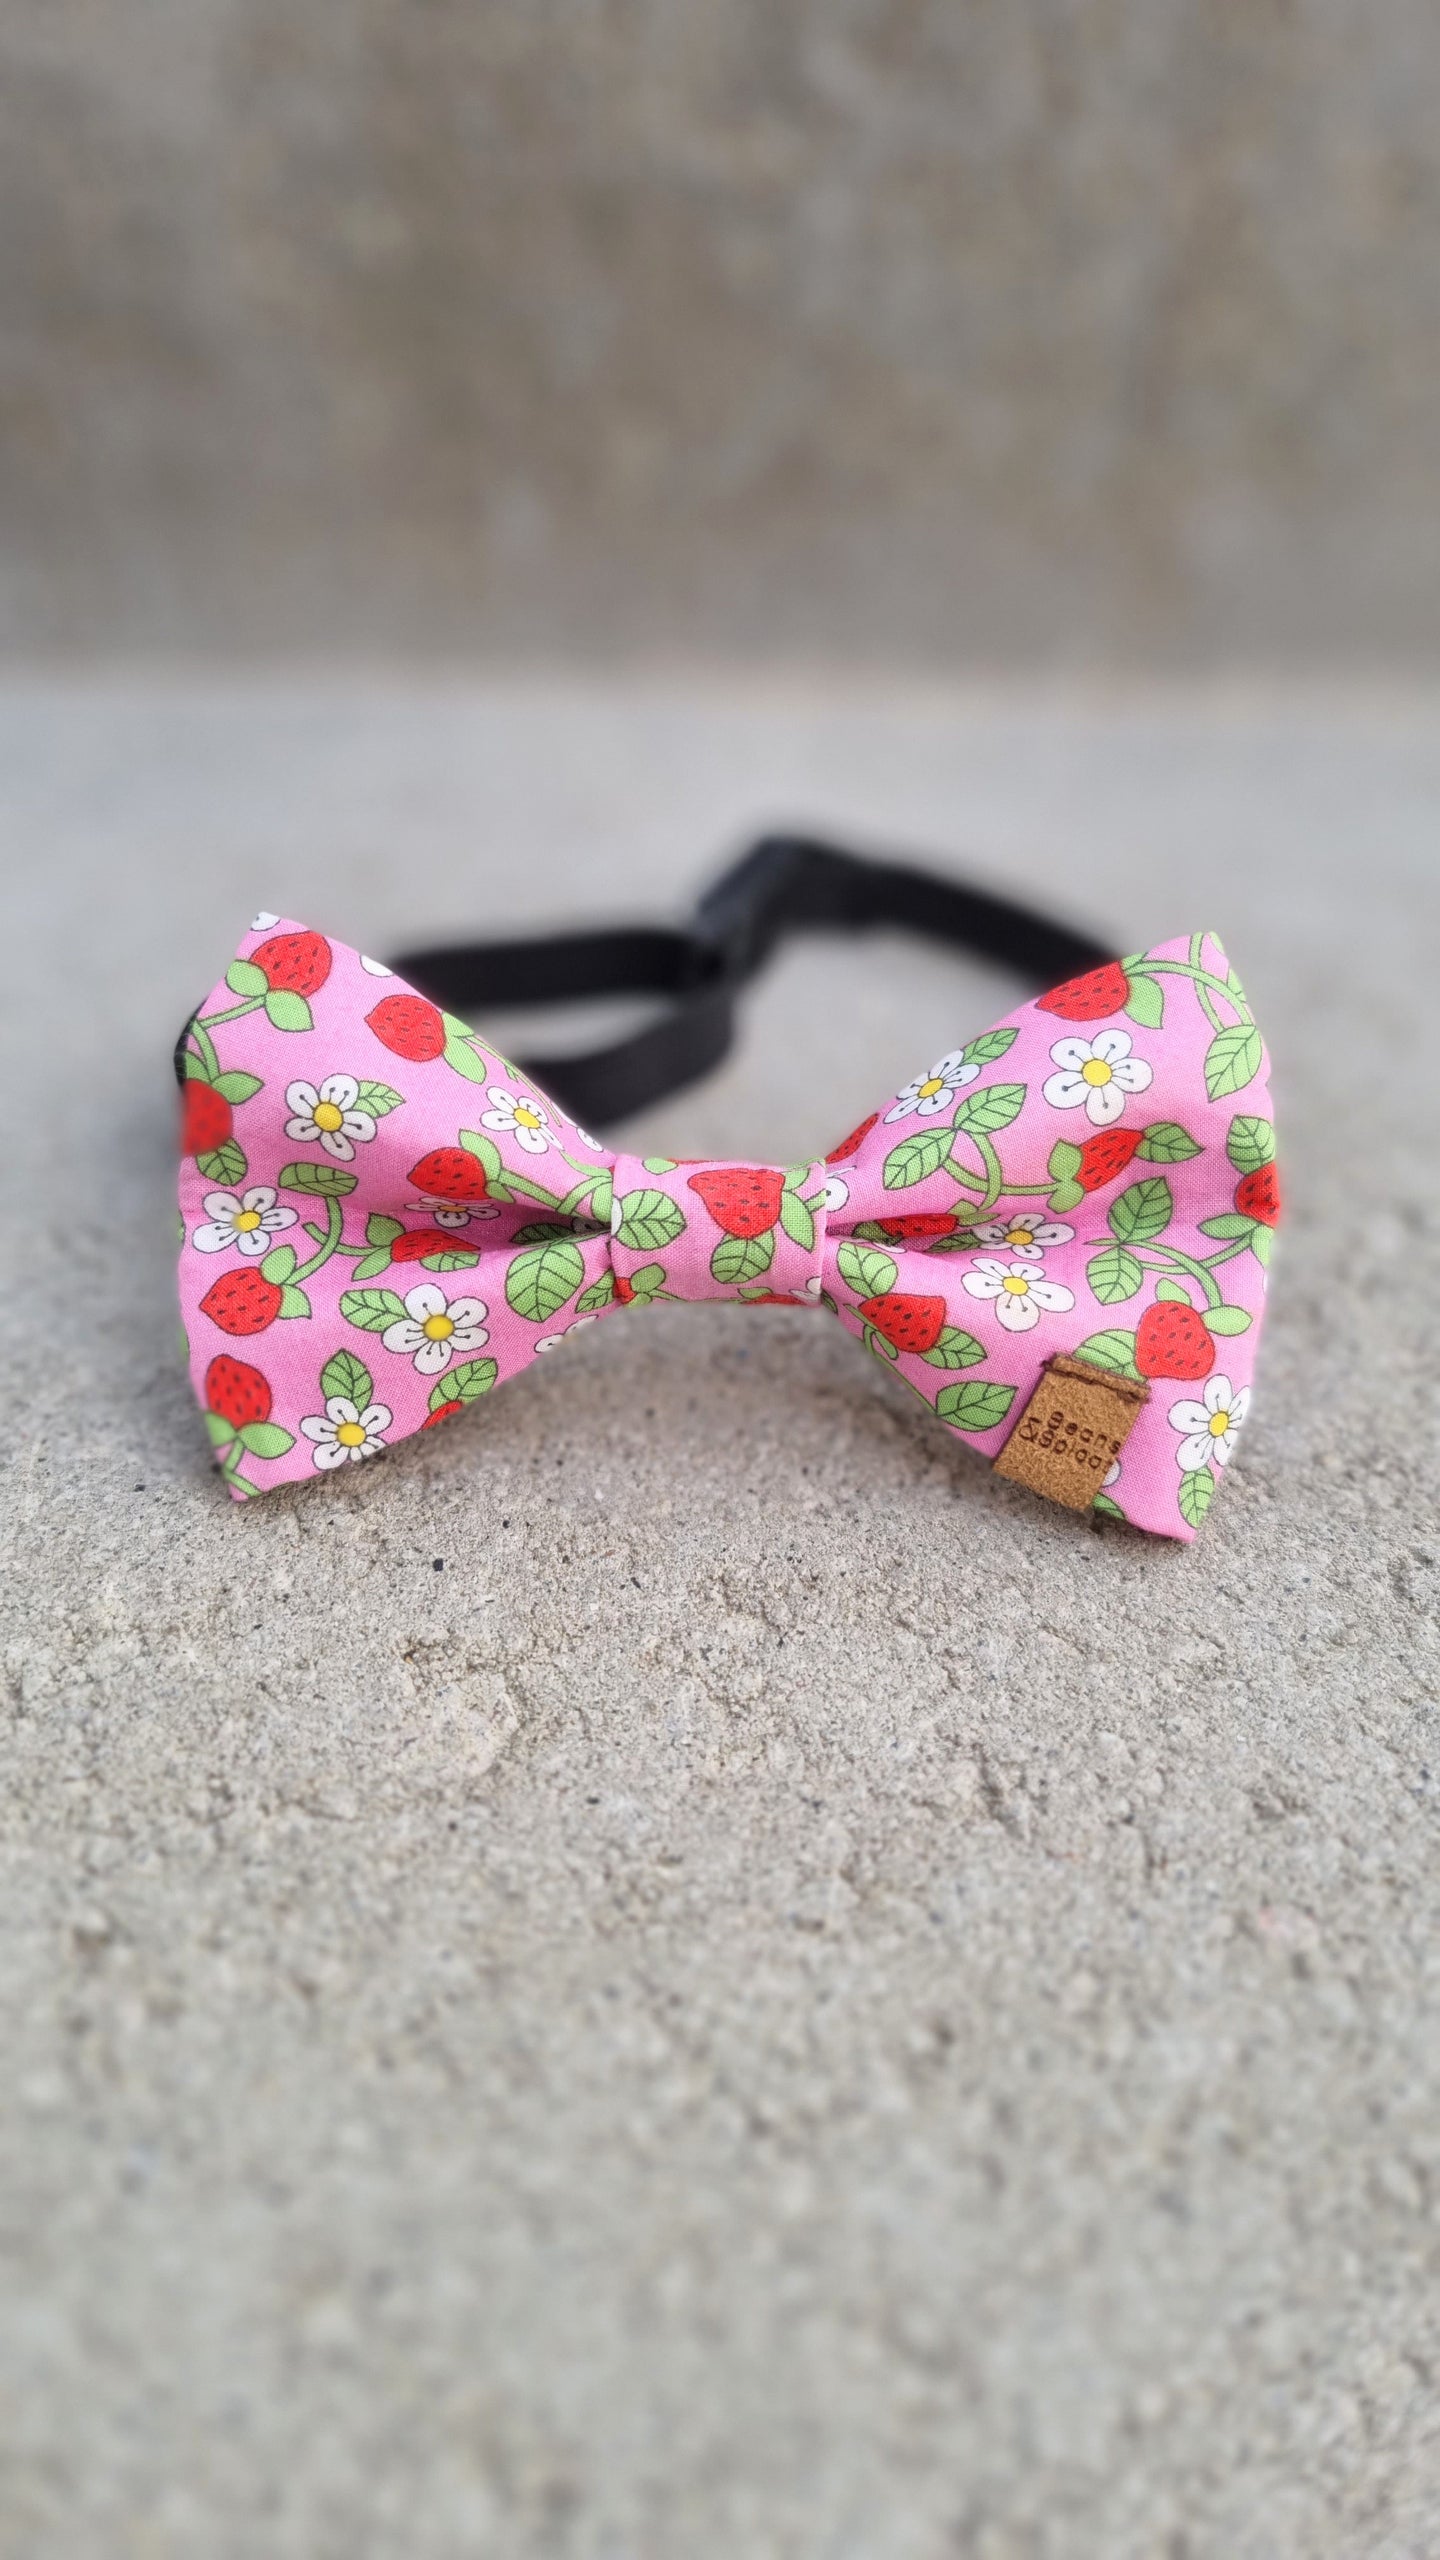 A pink dog bow tie with strawberry and white flower pattern.